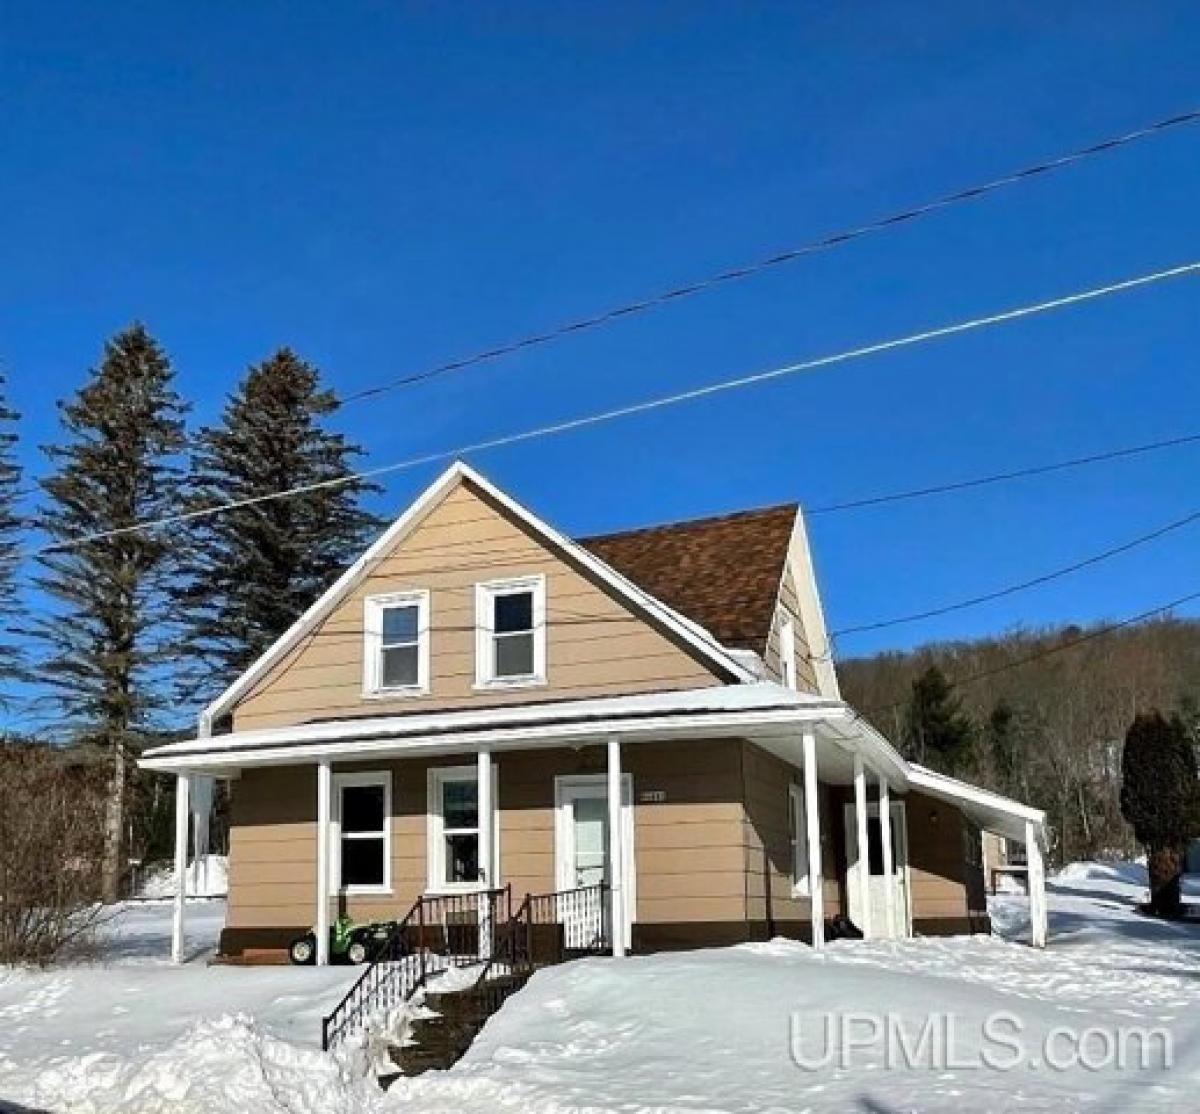 Picture of Home For Sale in Norway, Michigan, United States